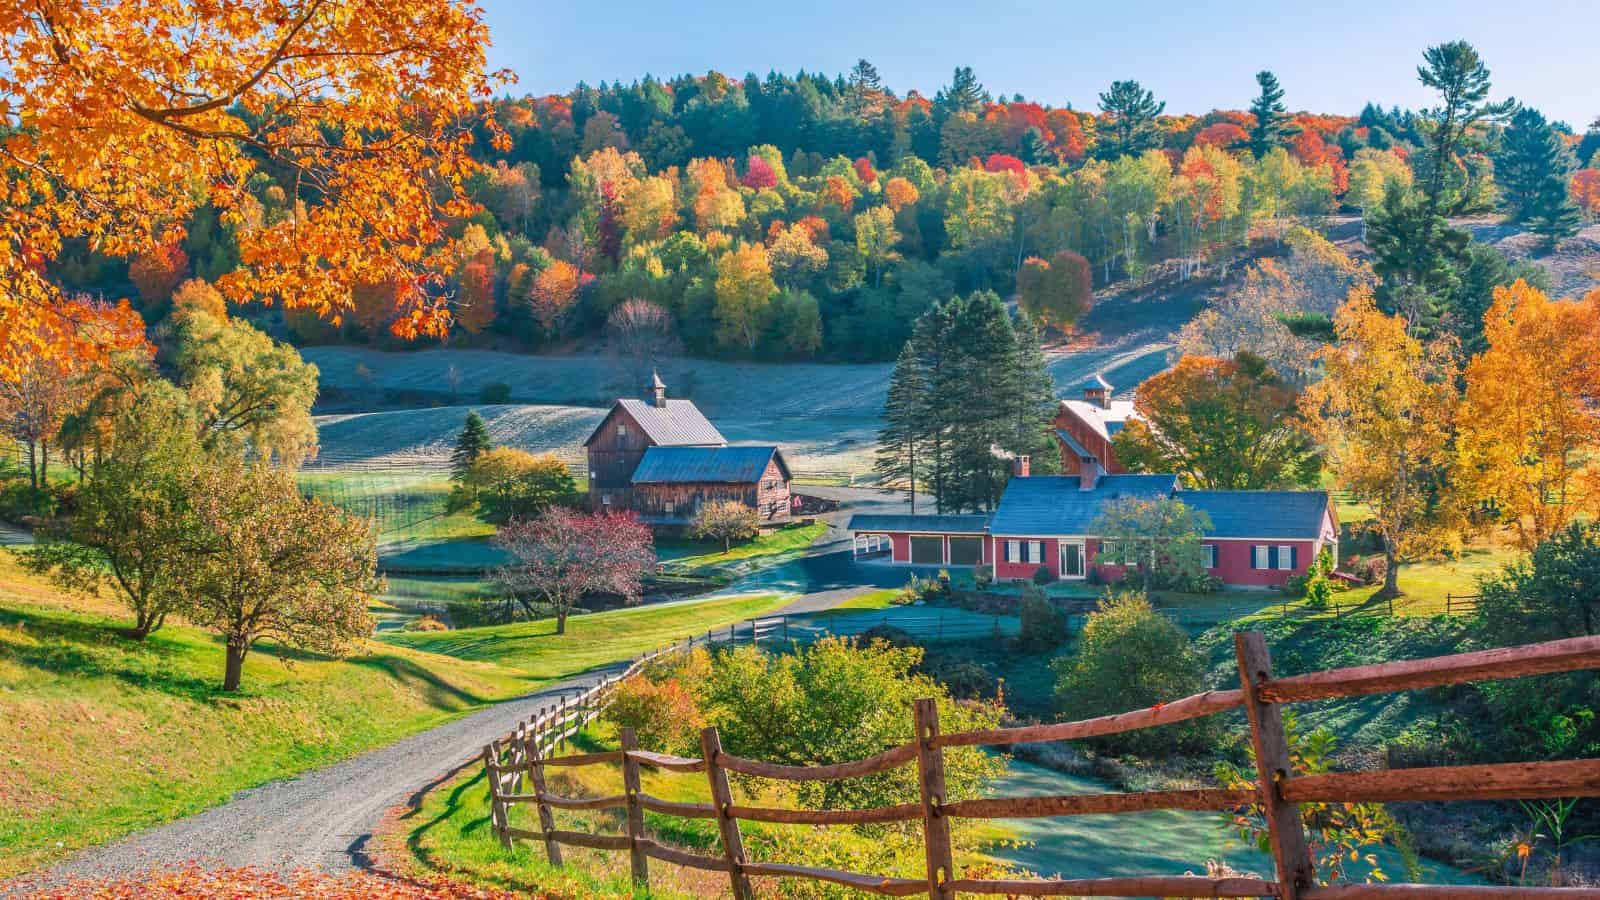 <p>Named one of the “most beautiful small towns in America” by <a href="https://www.cntraveler.com/gallery/the-most-beautiful-towns-in-america" rel="nofollow external noopener noreferrer">Condé Nast Traveler</a>, Woodstock is a favorite New England destination in nearly all seasons. It’s easy to see why—surrounded by the Green Mountains, the town is absolutely picturesque.</p><p>Swim in the Ottaquechee River or hike Mount Tom, then stop at Woodstock Scoops for ice cream, summer’s favorite treat, when you’re done. For a quintessentially Vermont souvenir, go to F.H. Gillingham & Sons to pick up a bottle of local maple syrup.</p>